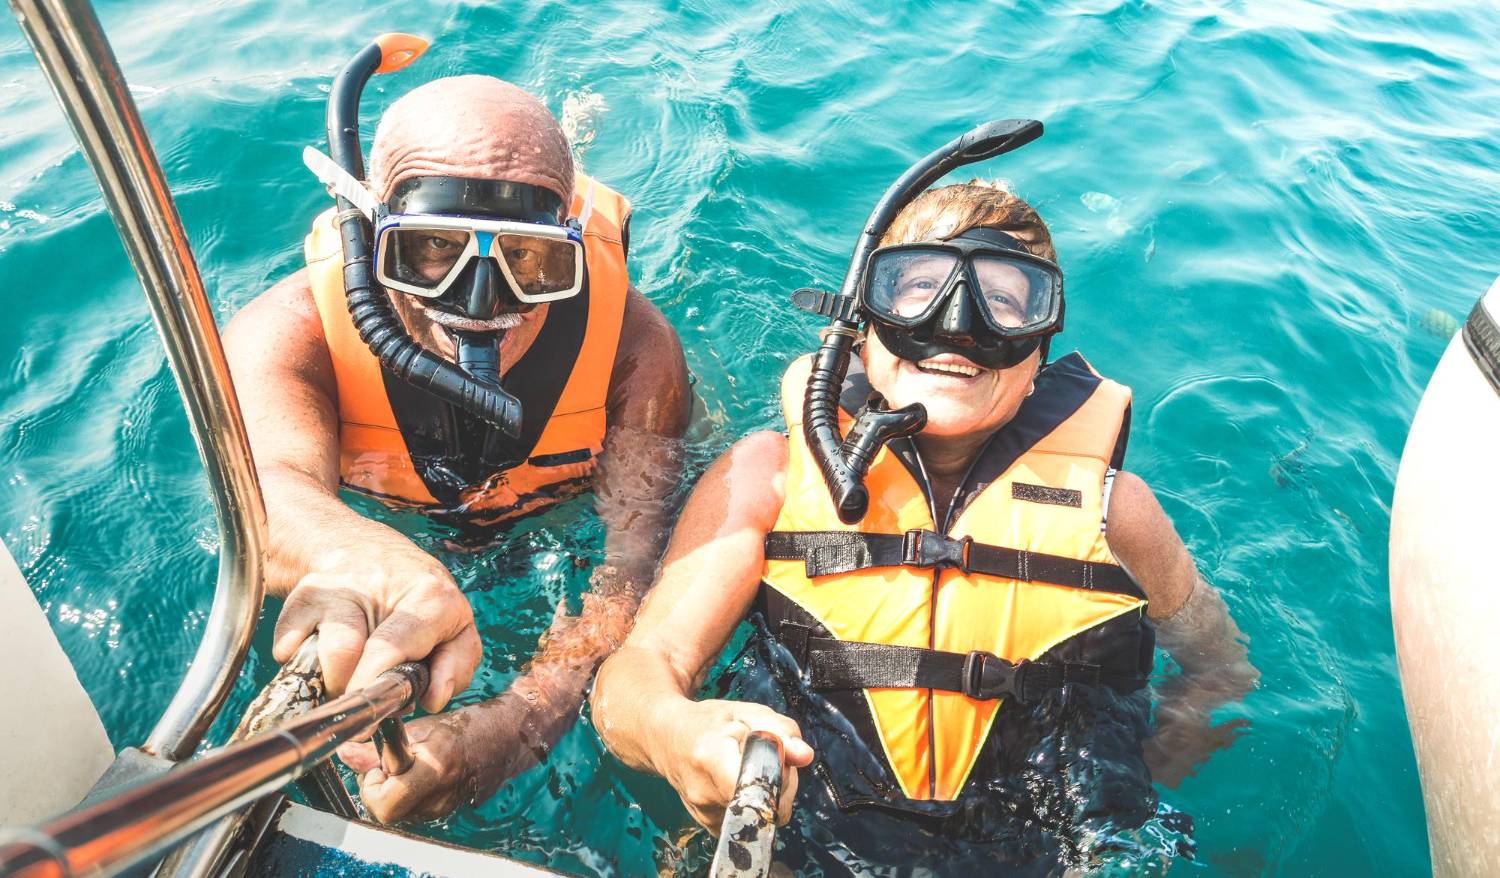 Ex"Two snorkelers in life jackets smiling eagerly before their dolphin encounter adventure at sea."tending Your Adventure